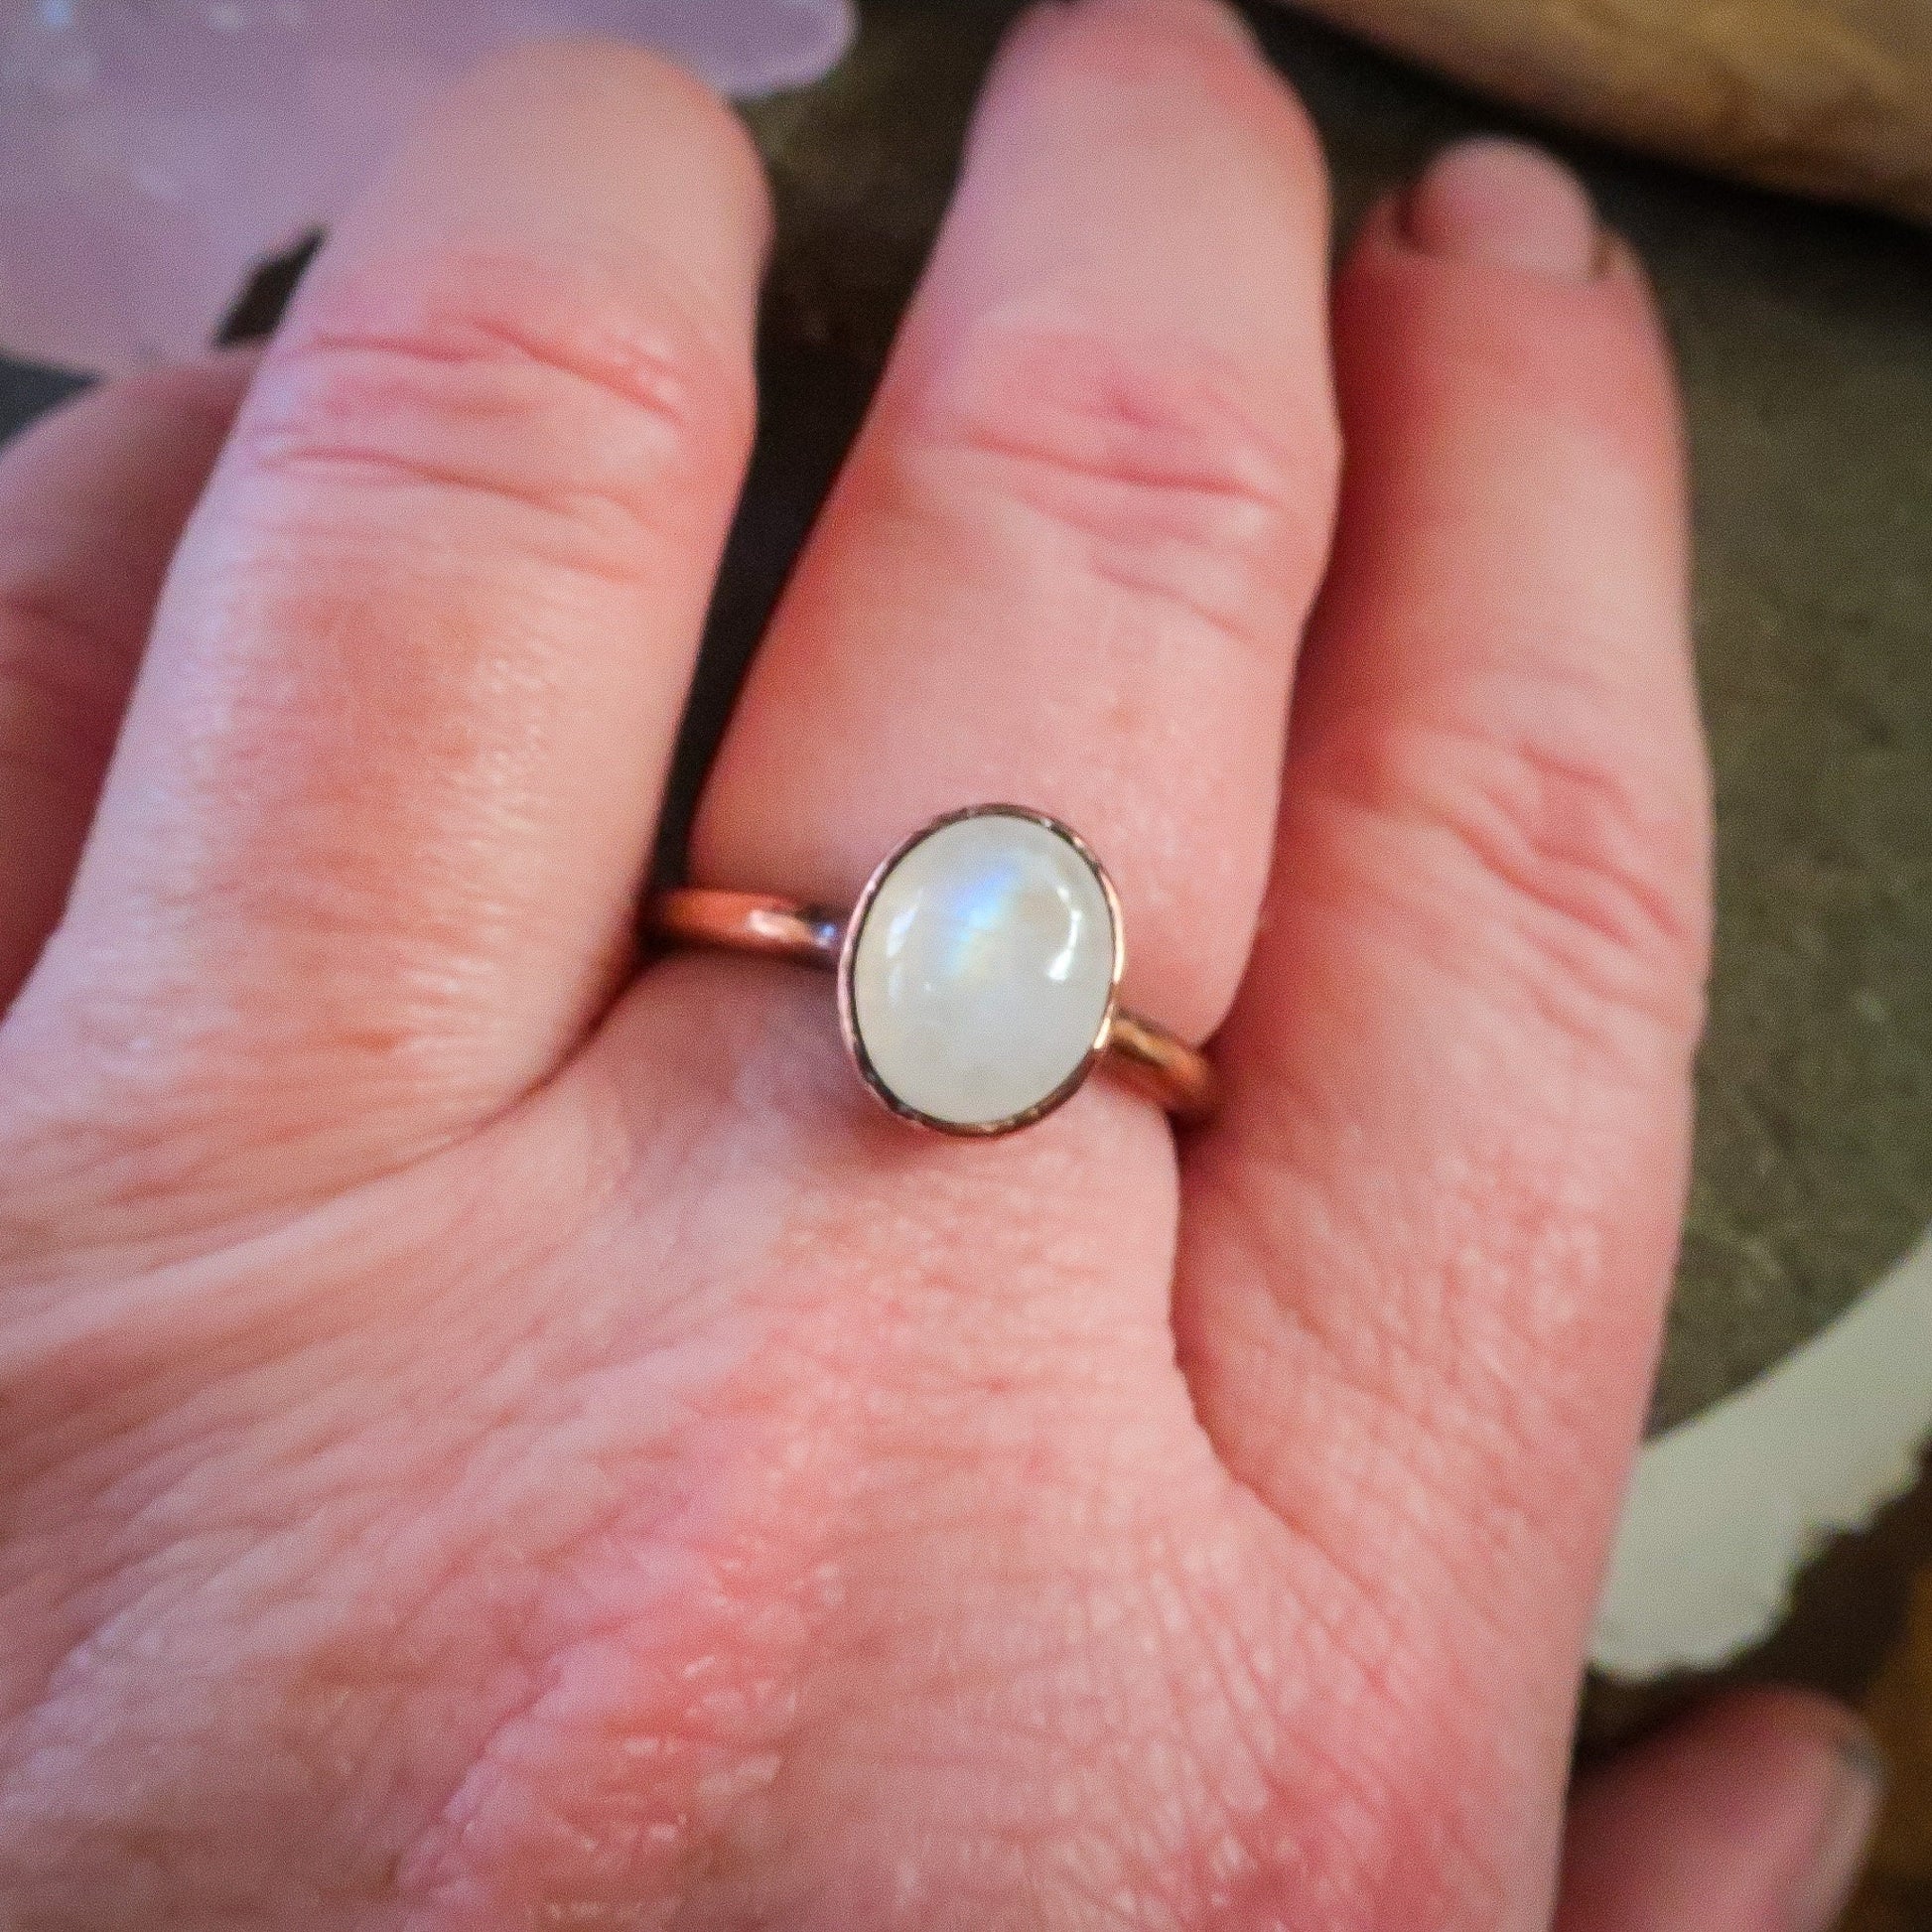 Rainbow Moonstone Oval Stone Ring in Copper | Size 7.5 | Crystal Ring, Talisman, Electroformed Jewelry, Rustic, Bohemian - Blackbird & Sage Jewelry